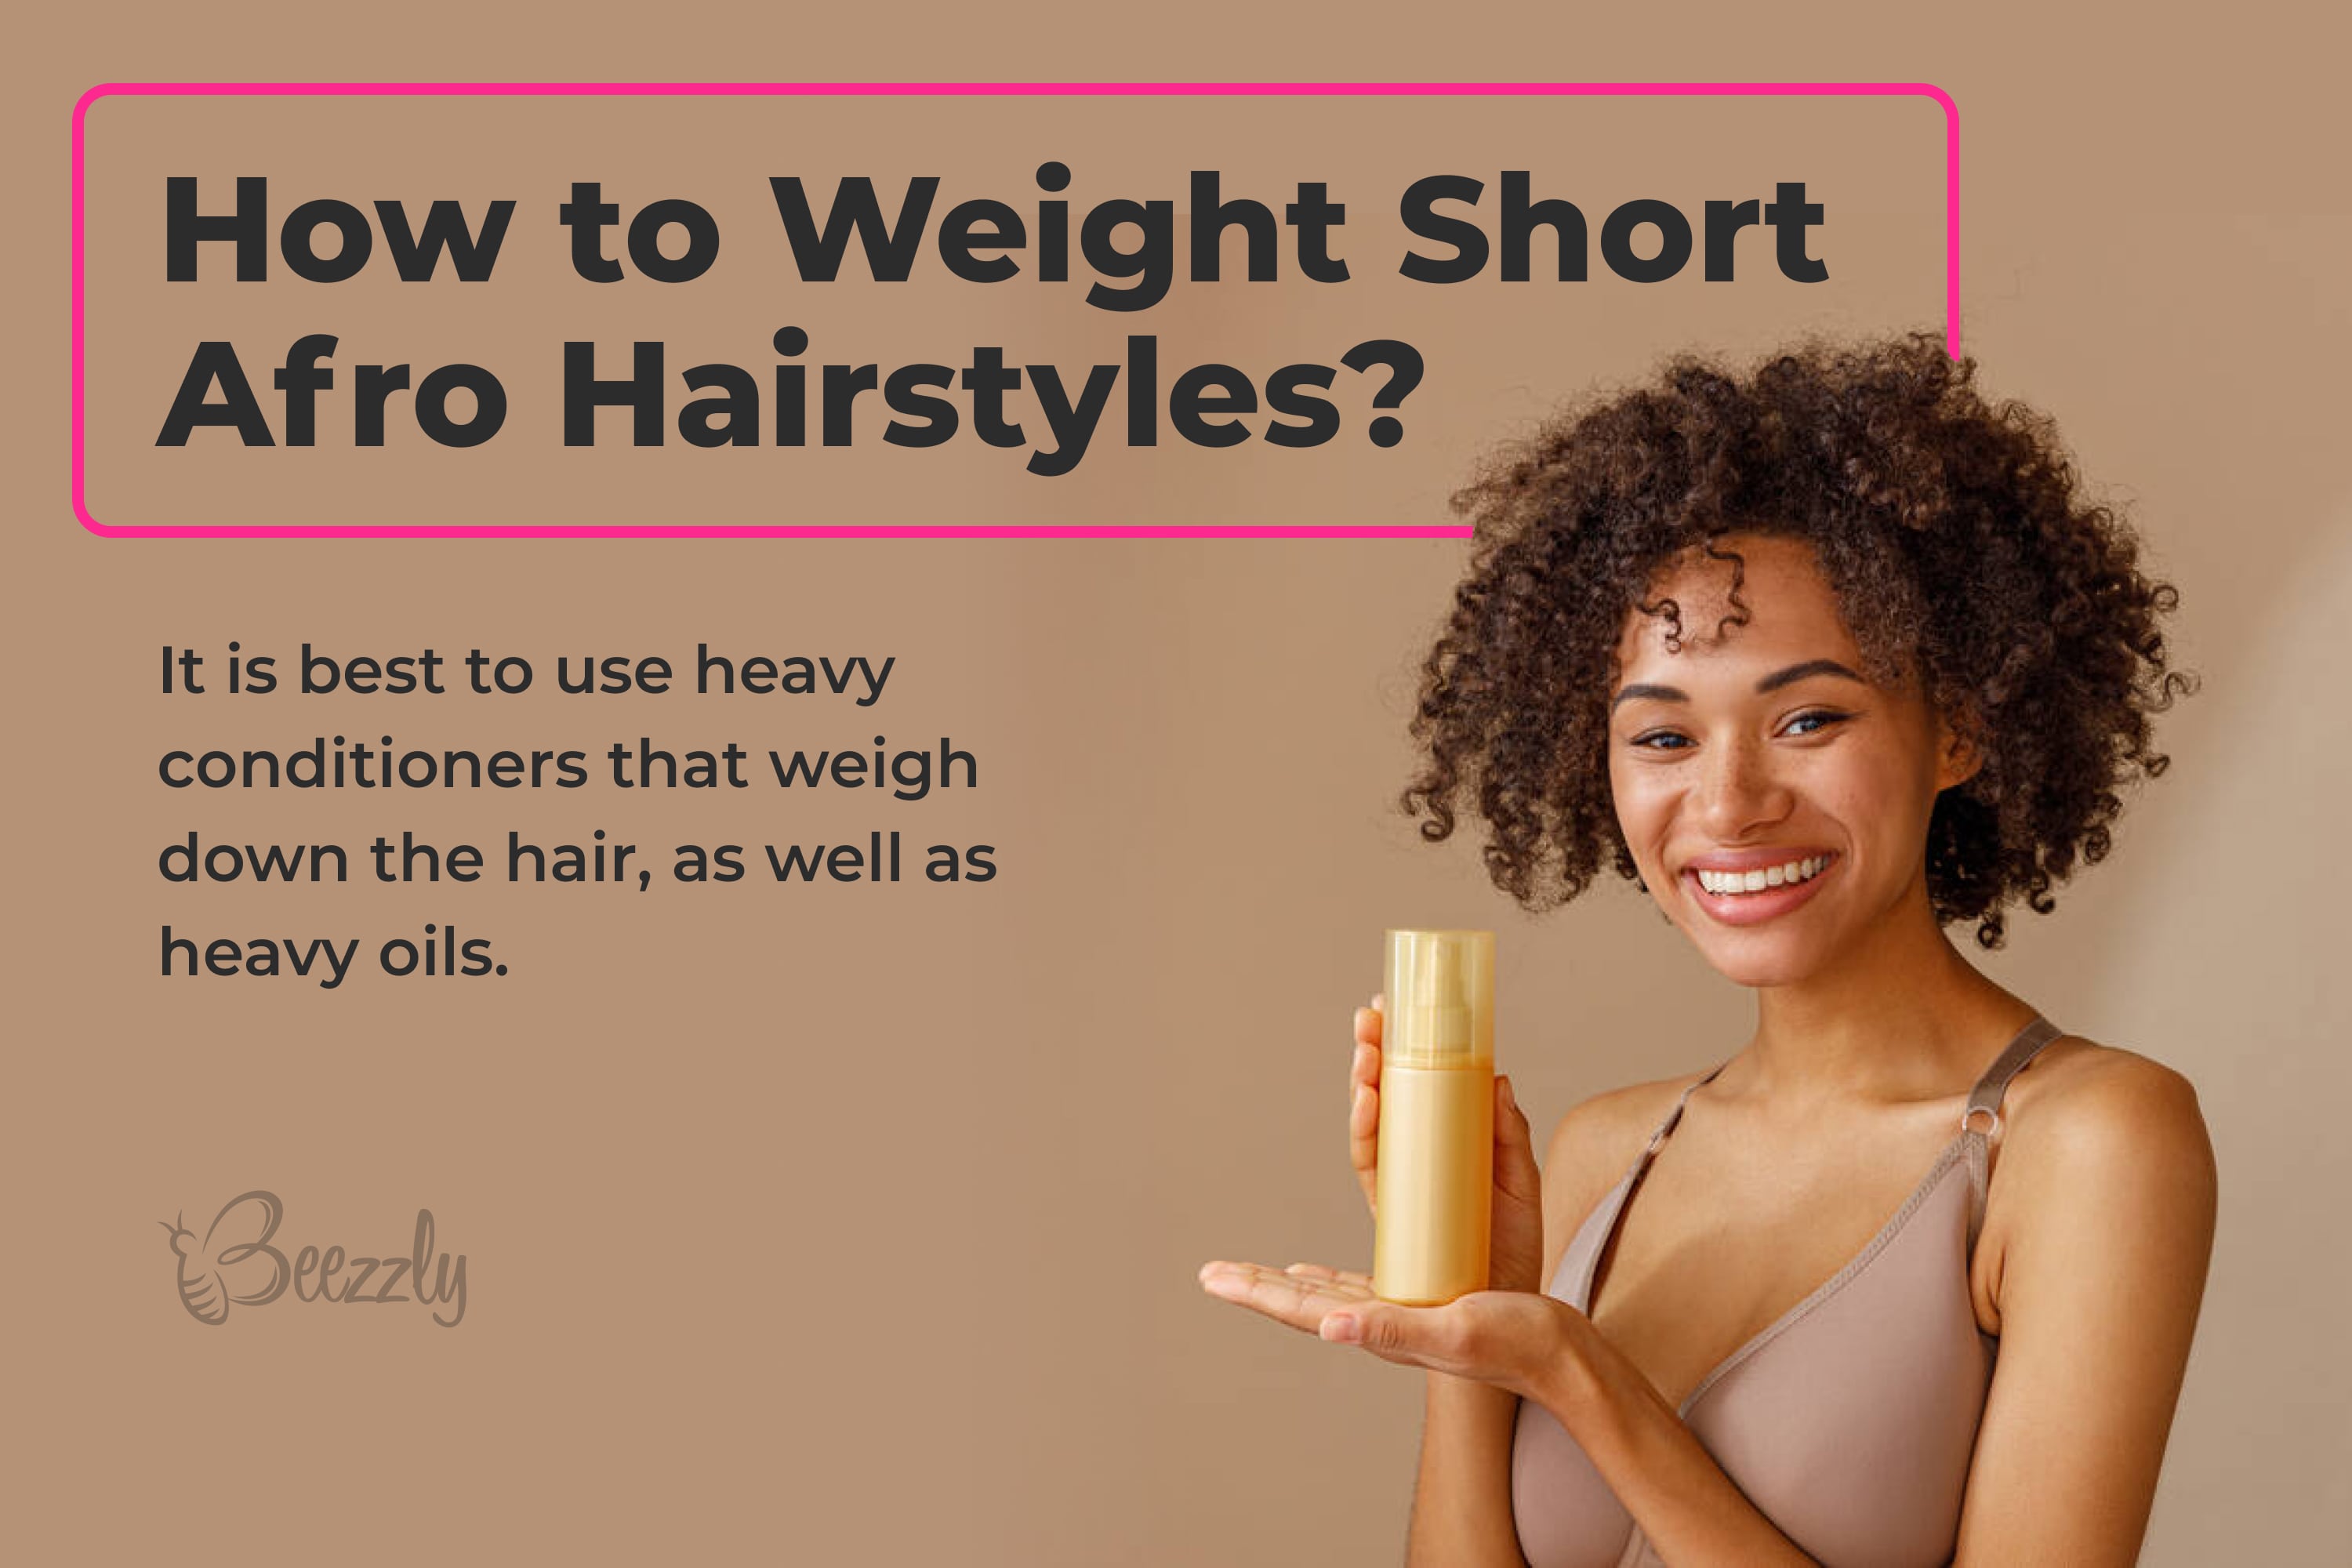 How to weight short afro hairstyles